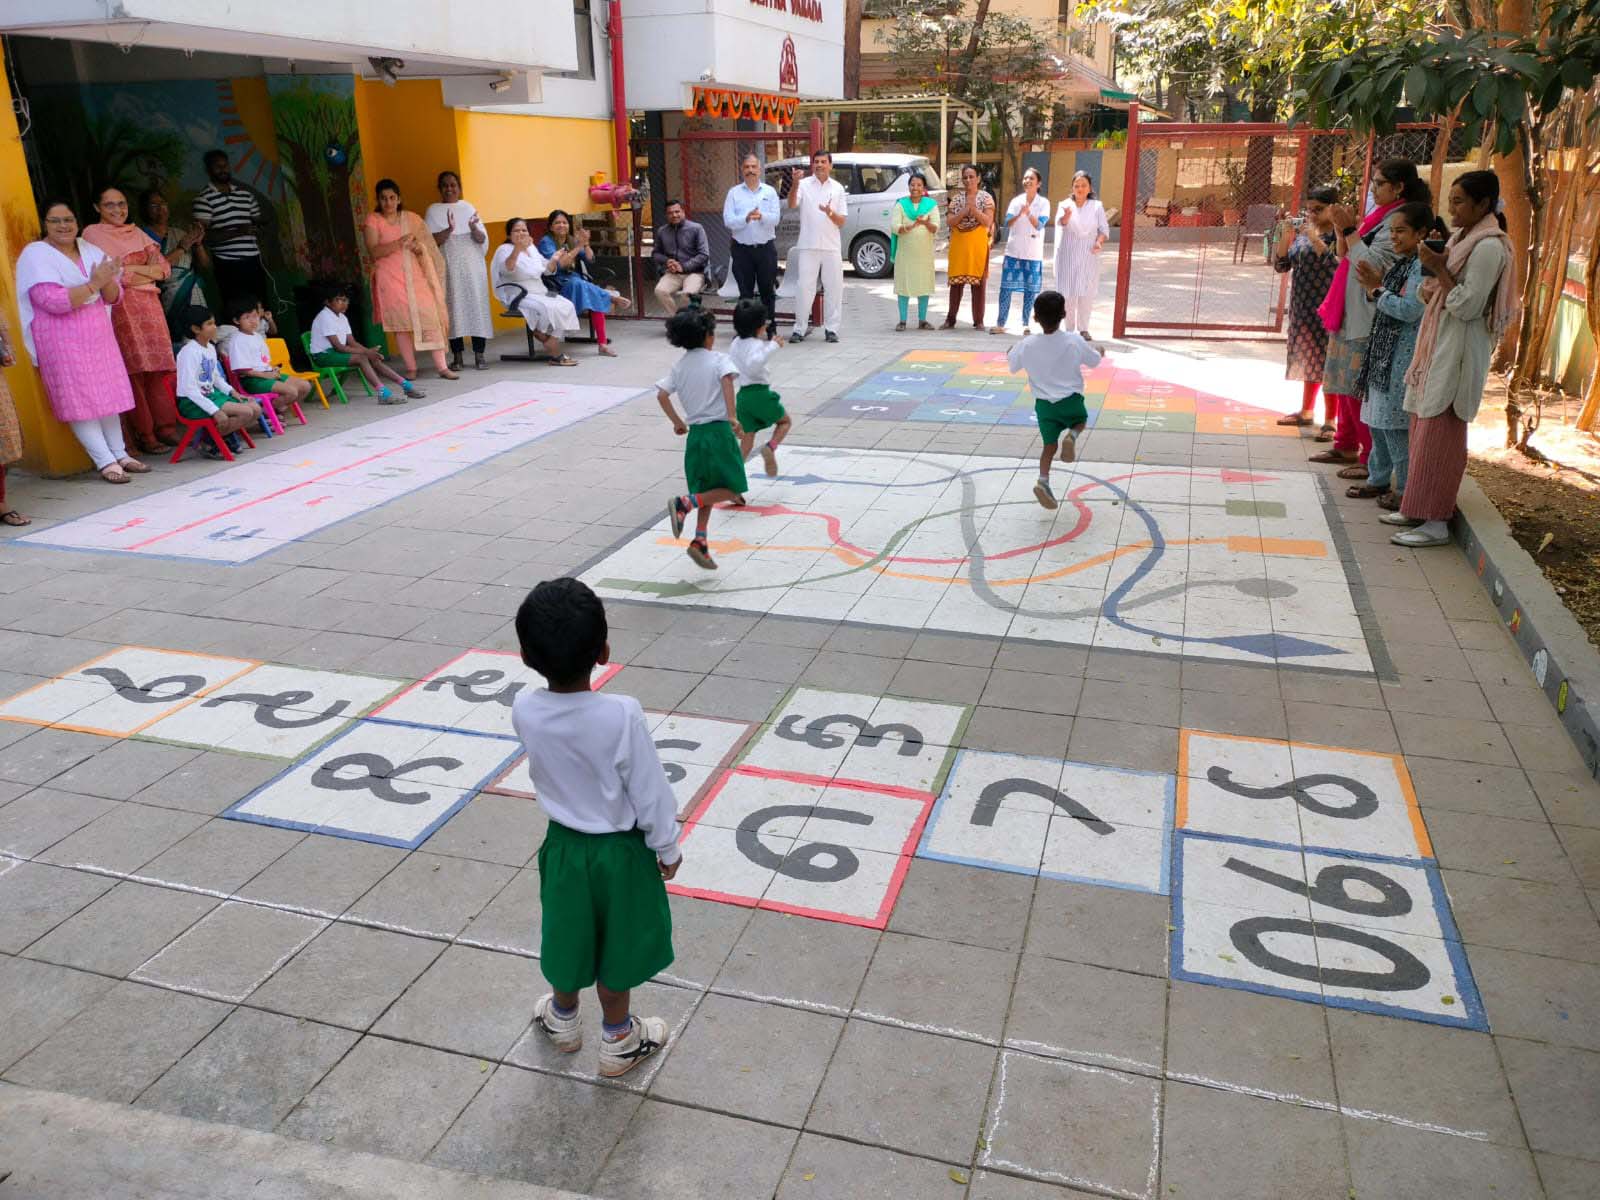 A group of little kids gather to play games outside with their mothers watching